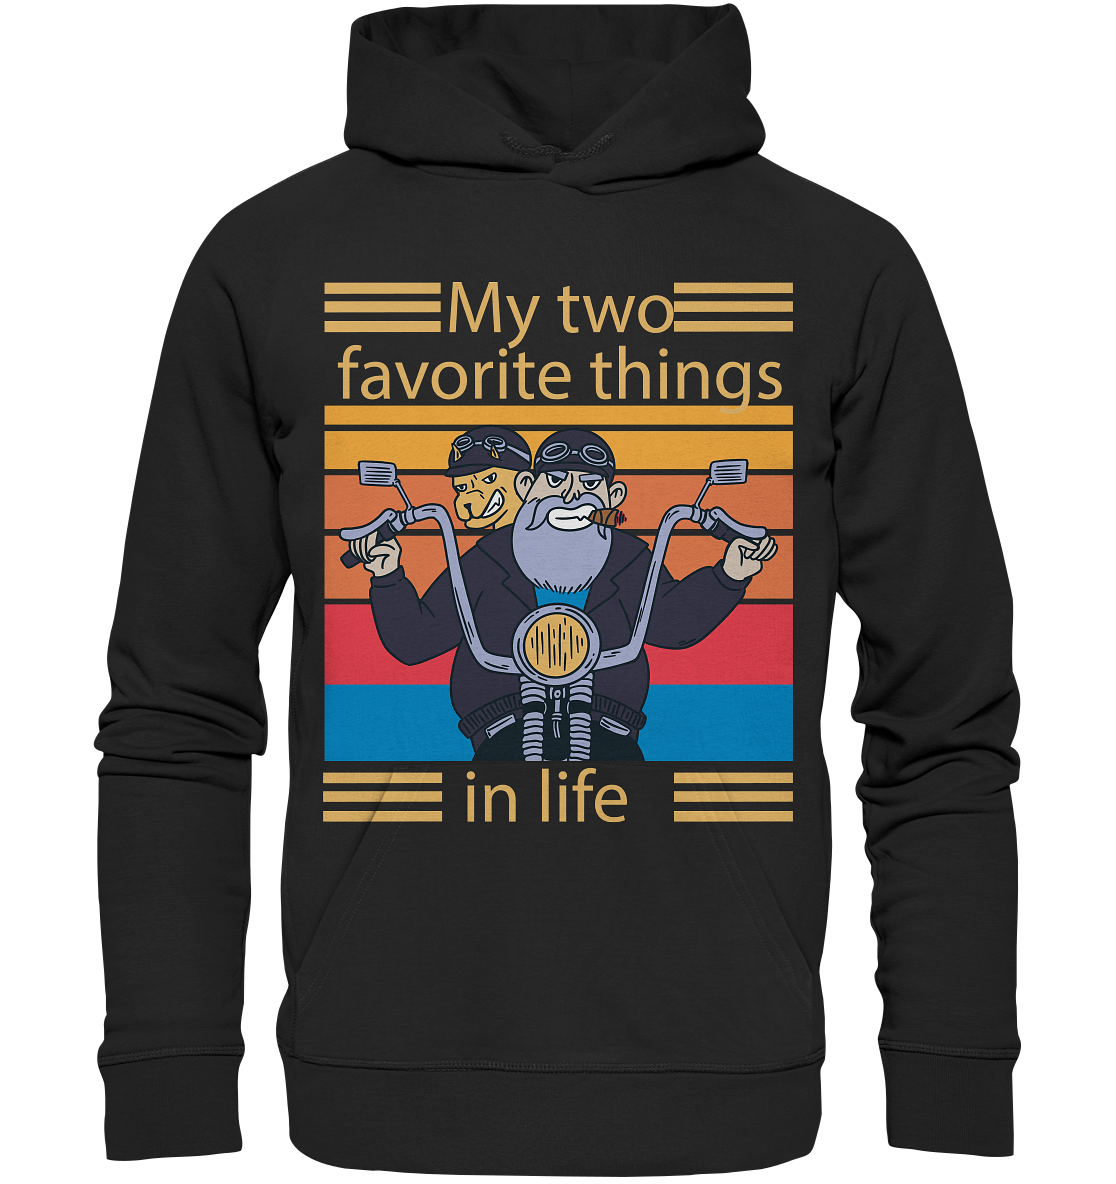 My two favorite things in life - Organic Hoodie - Online Kaufhaus München